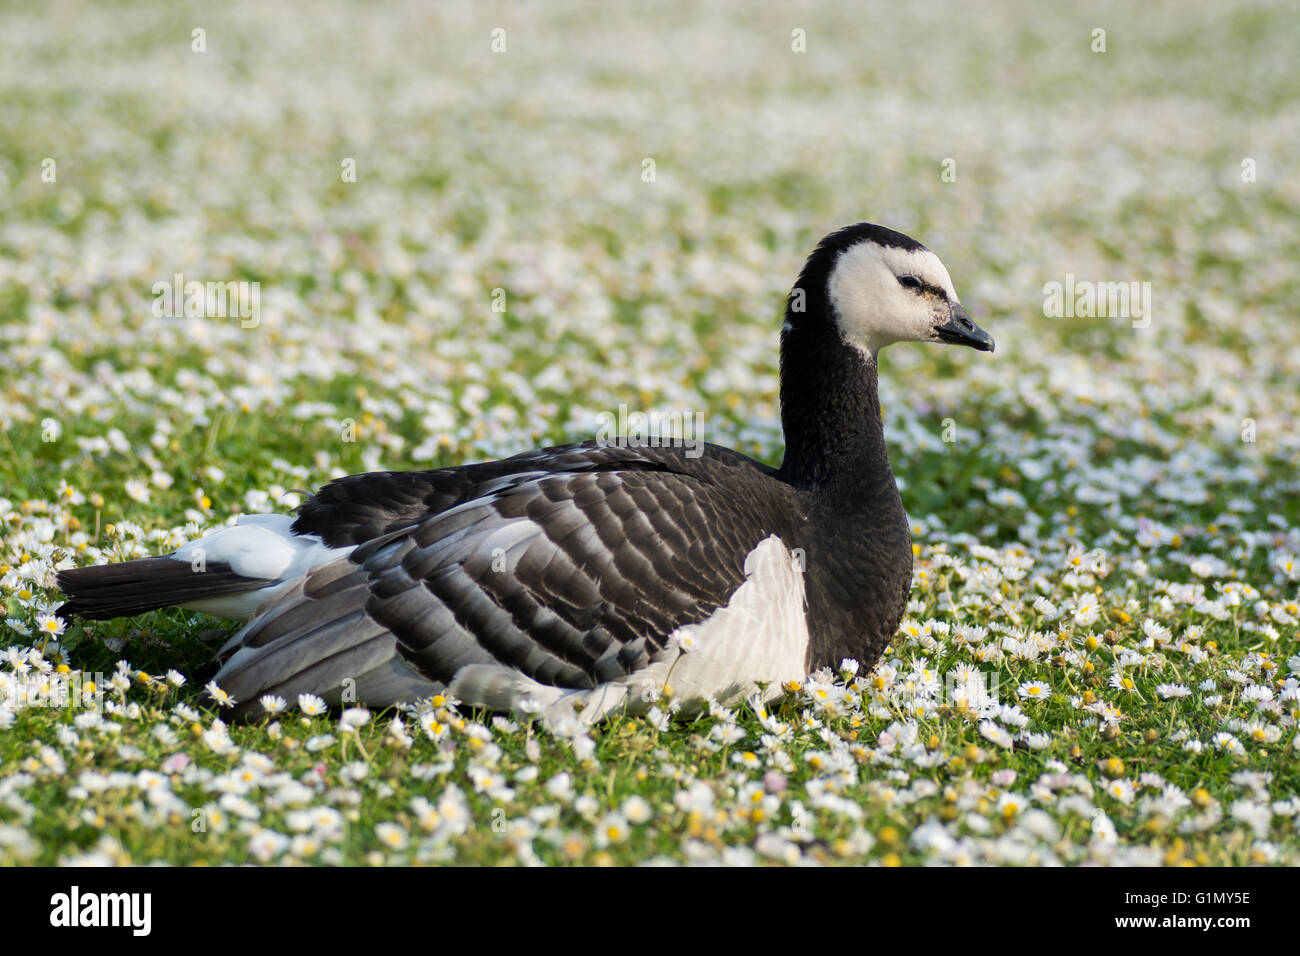 Barnacle goose (Branta leucopsis). Black and white bird in family Anatidae, sitting amongst short grass with daisies in flowers Stock Photo